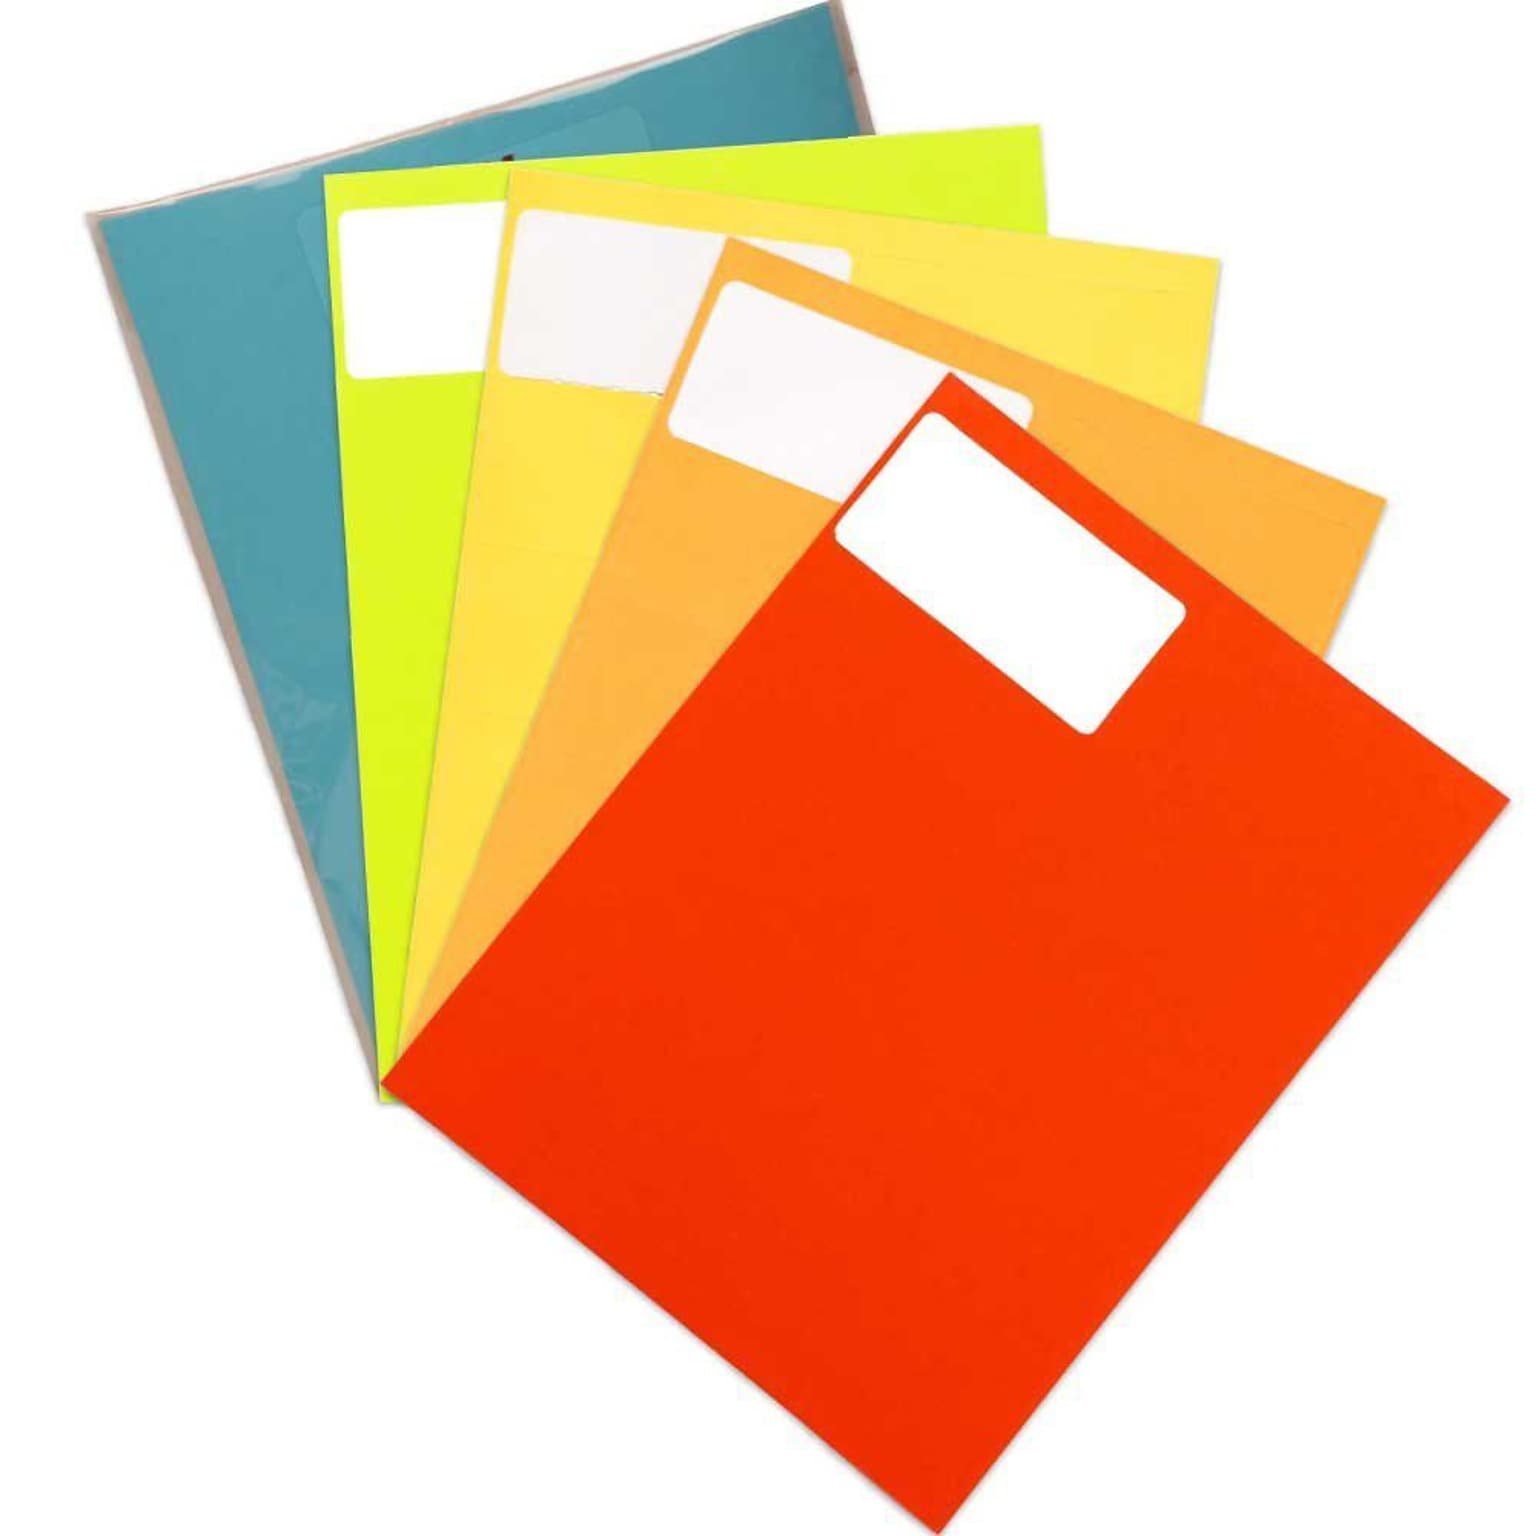 JAM Paper® Shipping Labels, 2 x 4, Assorted, 10 Labels/Sheet, 12 Sheets/Pack, 5 Packs/Box, 600 Total Labels (30272ASST24)